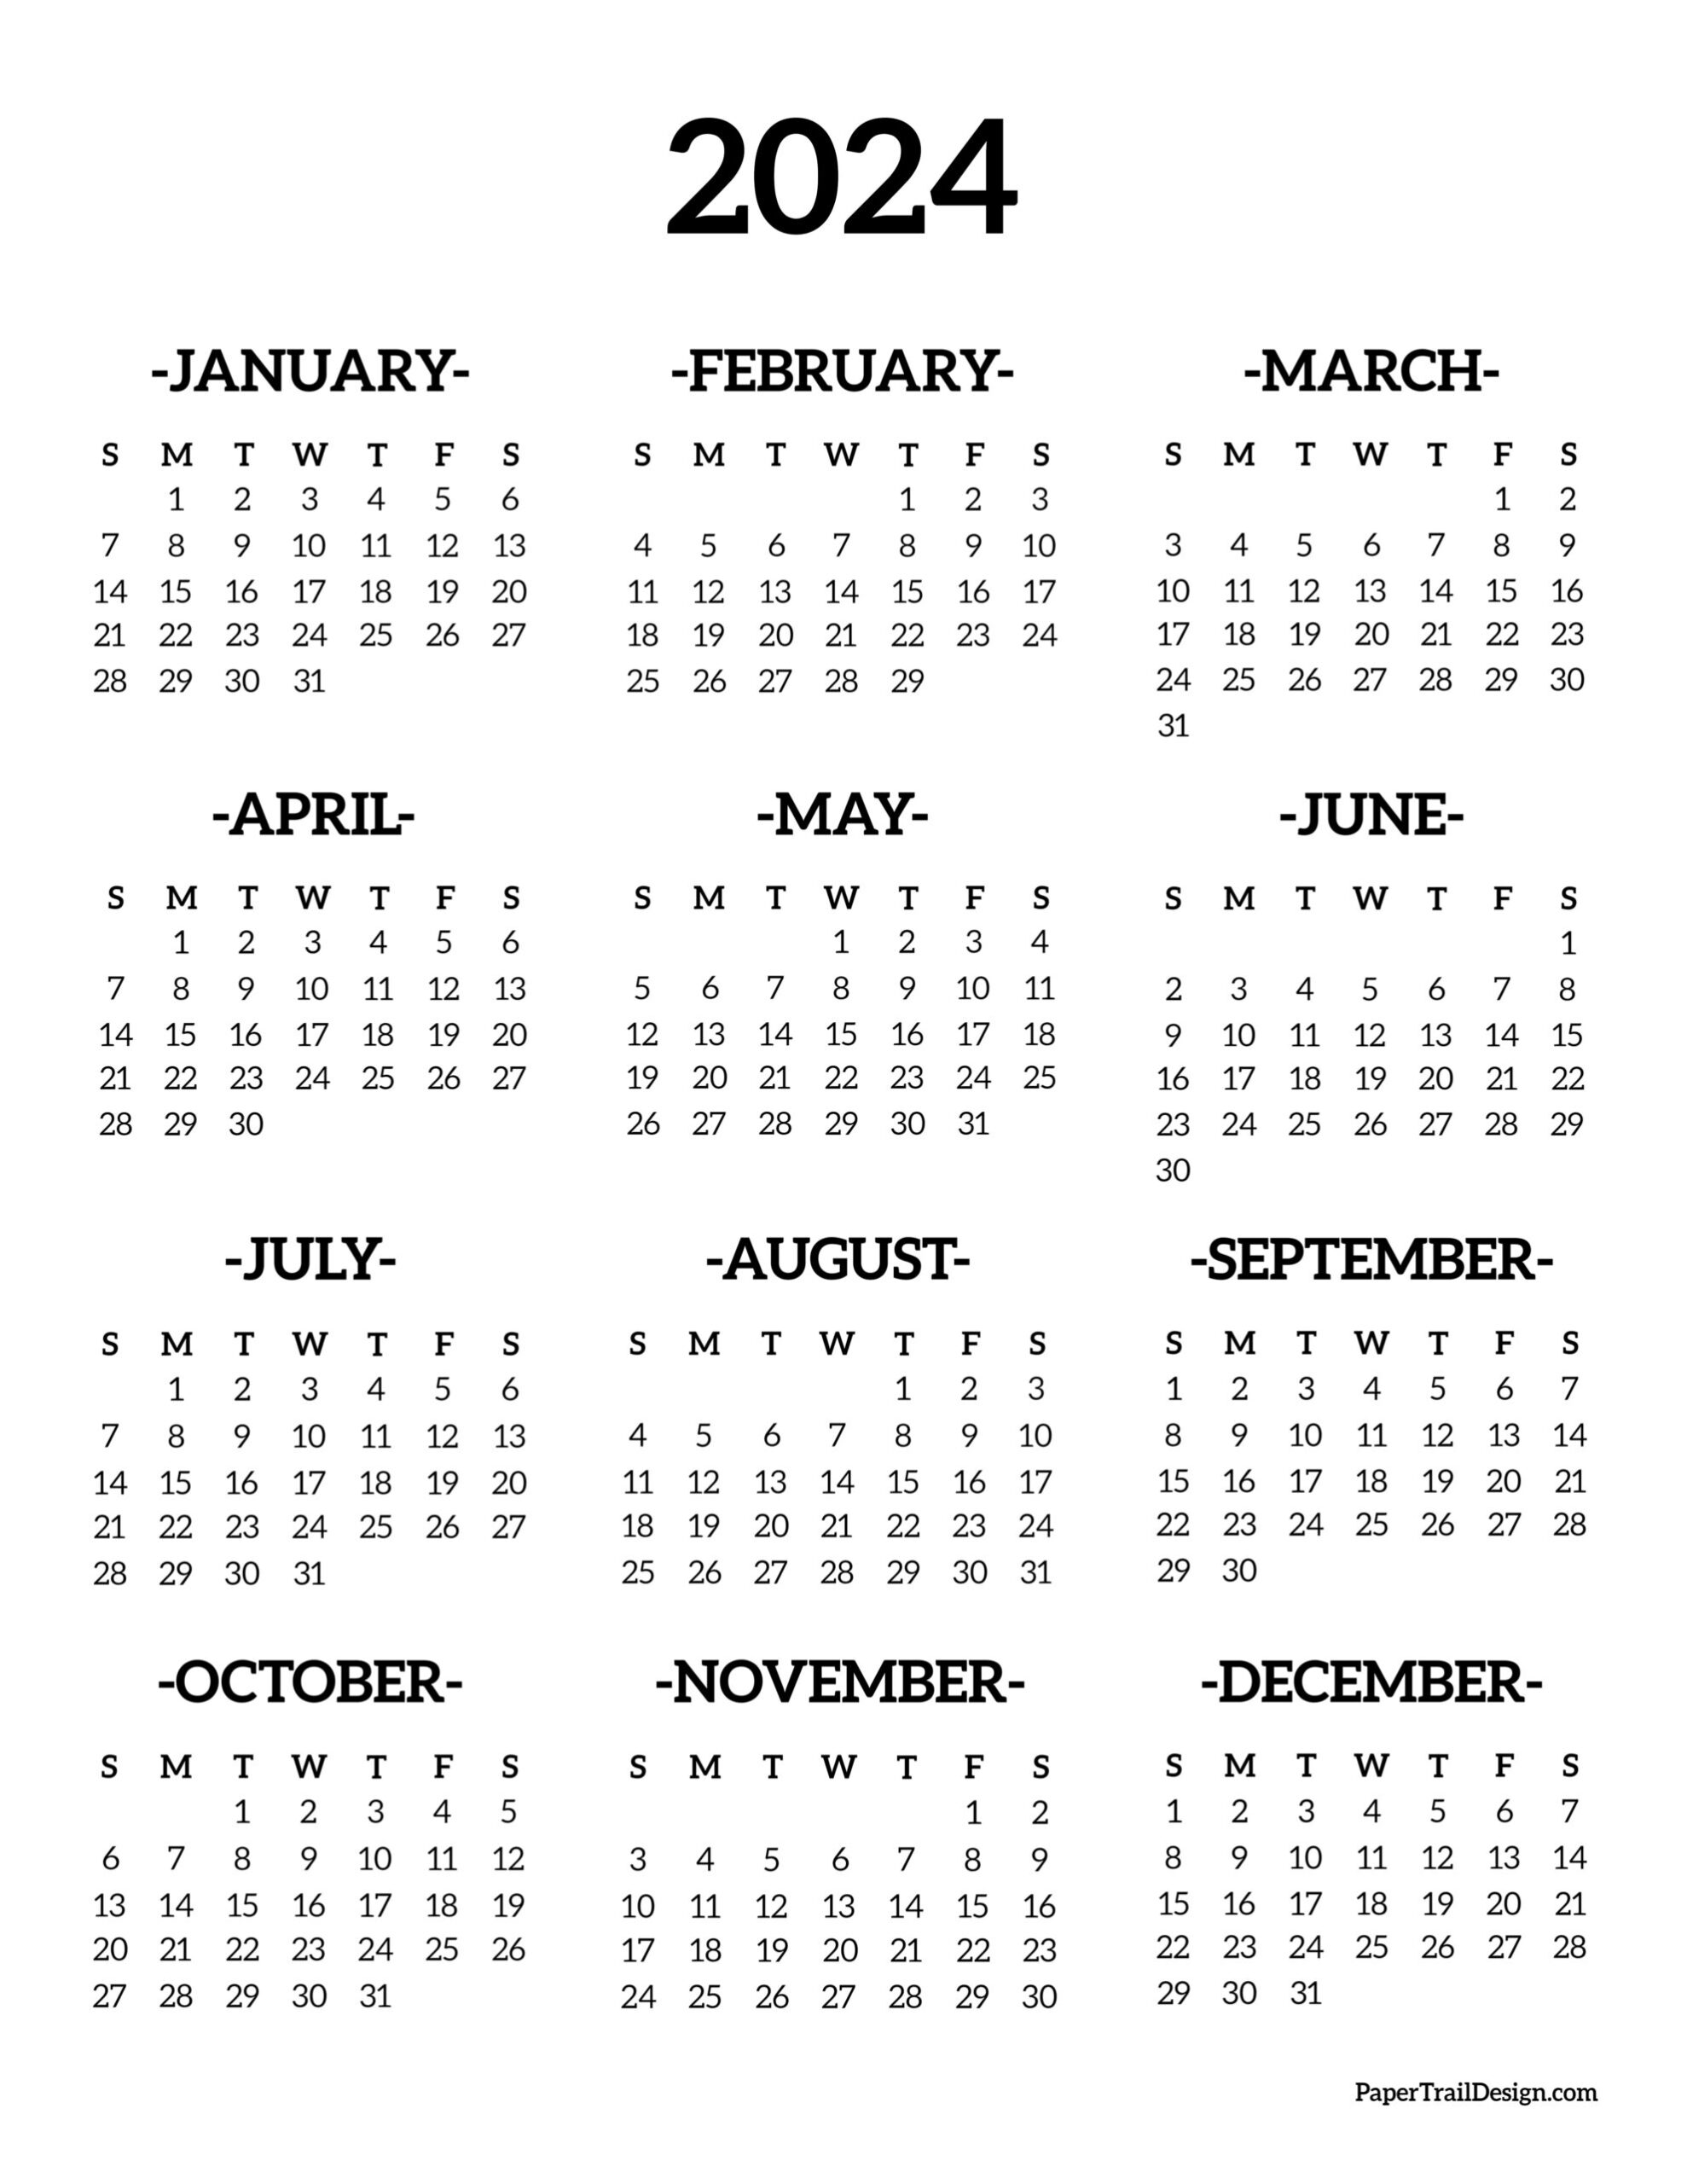 Calendar 2024 Printable One Page - Paper Trail Design for Free 2024 And 2024 Calendar Printable